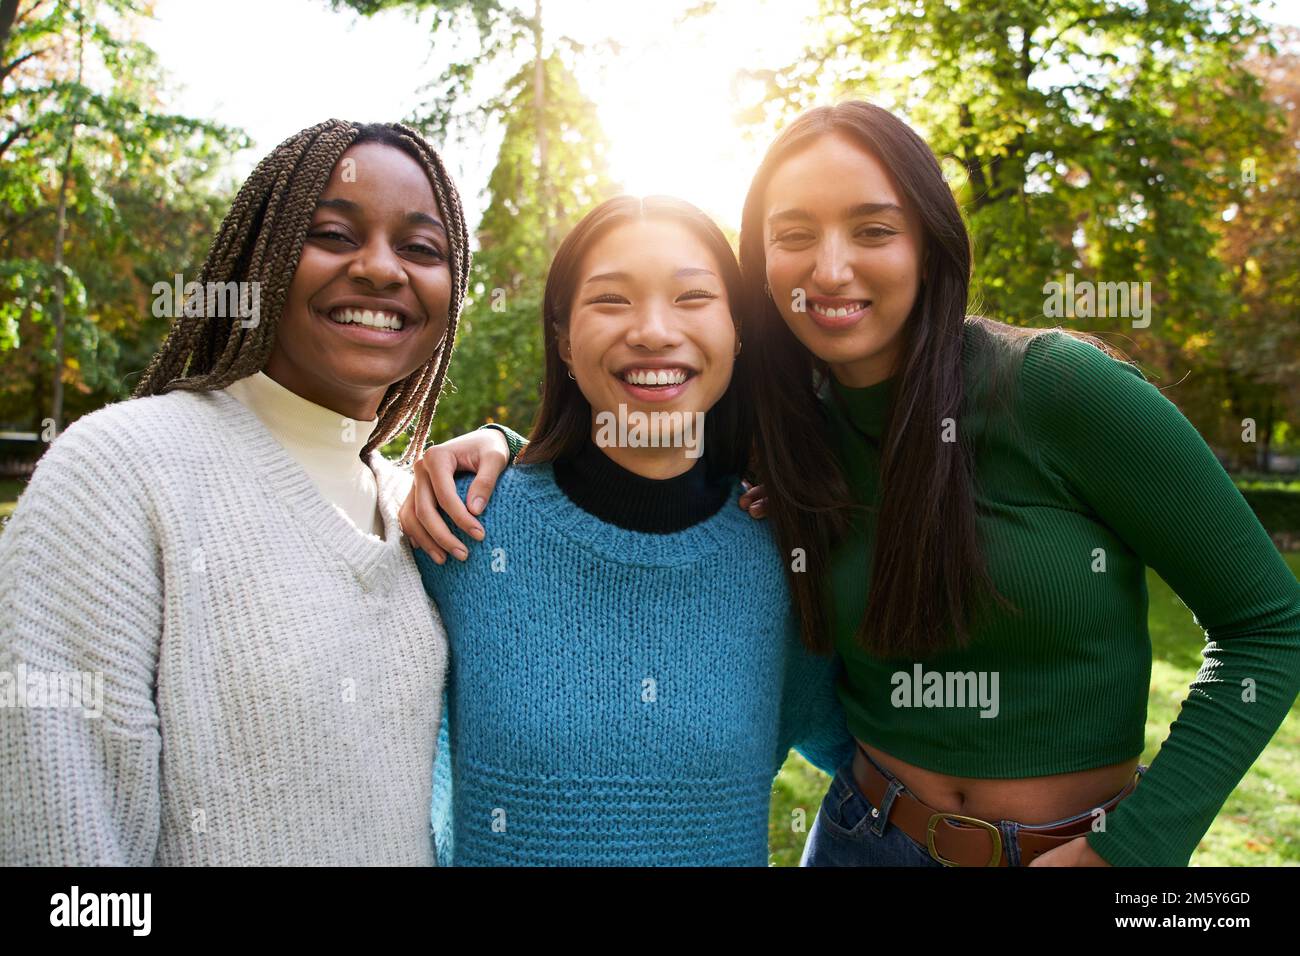 Portrait of three girls outside looking at the camera. Friendship in multi-ethnic groups of people Stock Photo